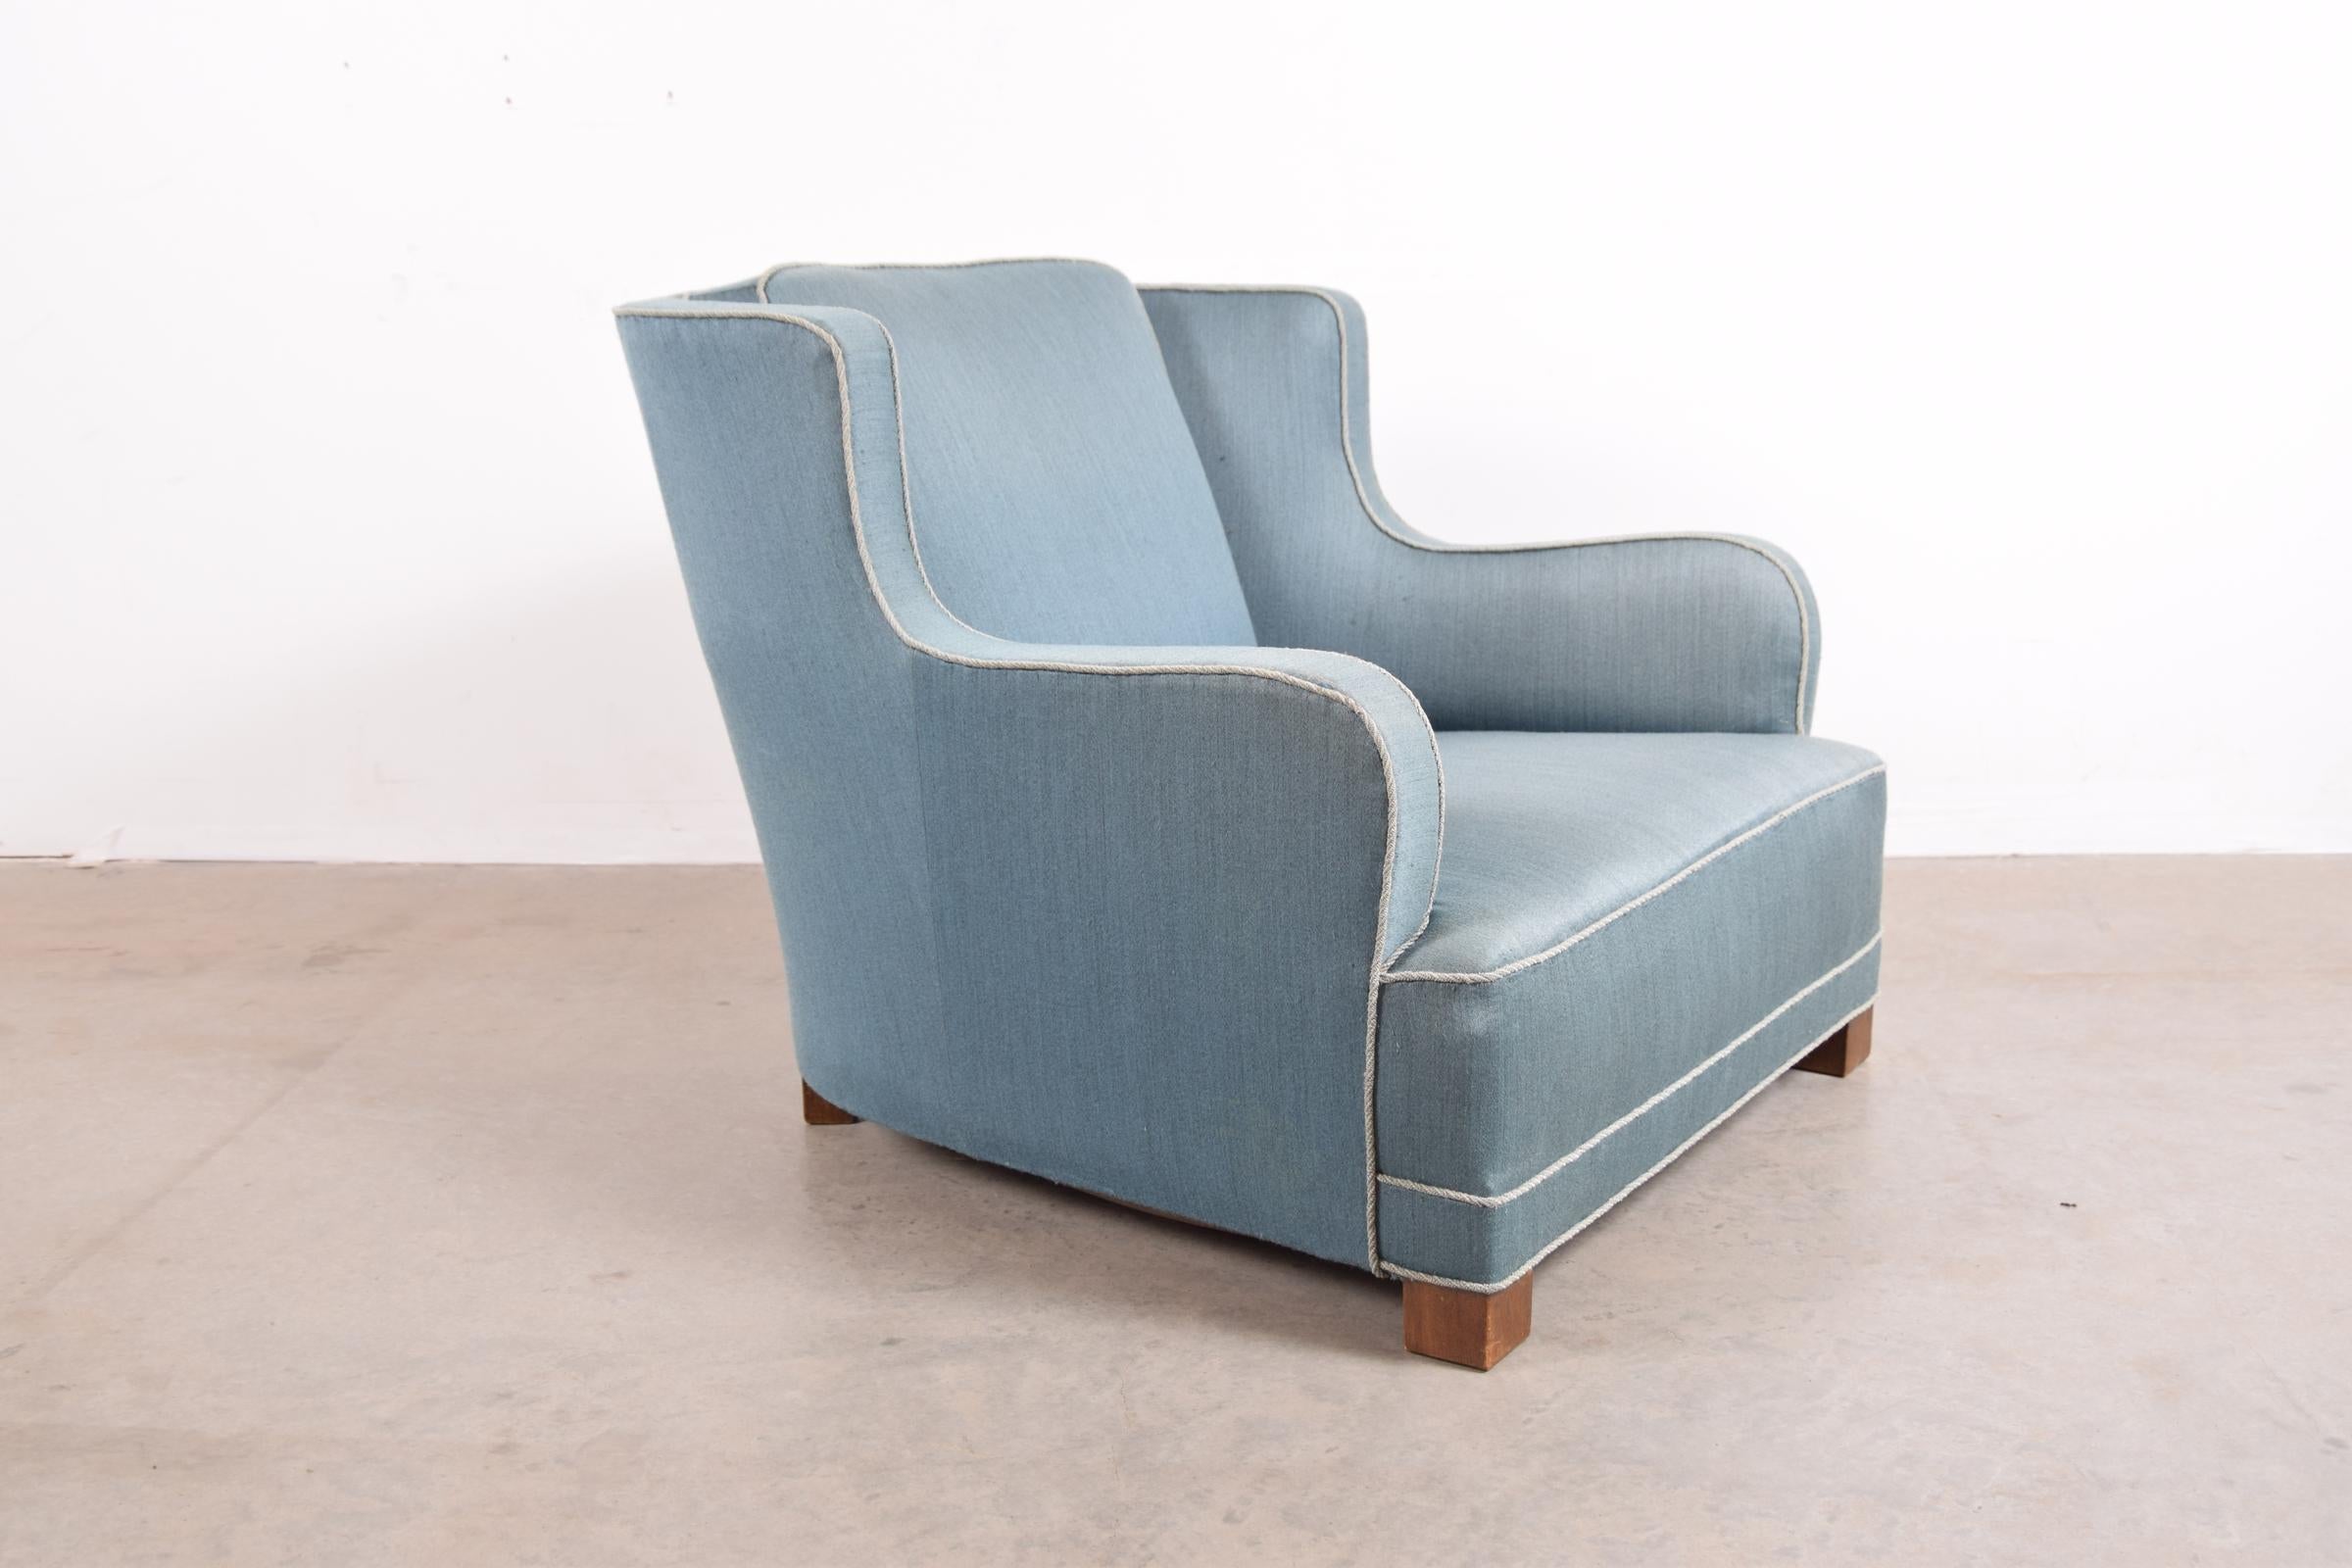 Danish lounge chair attributed to Fritz Hansen, circa 1948. A lounge chair with very generous proportions, it measures 33